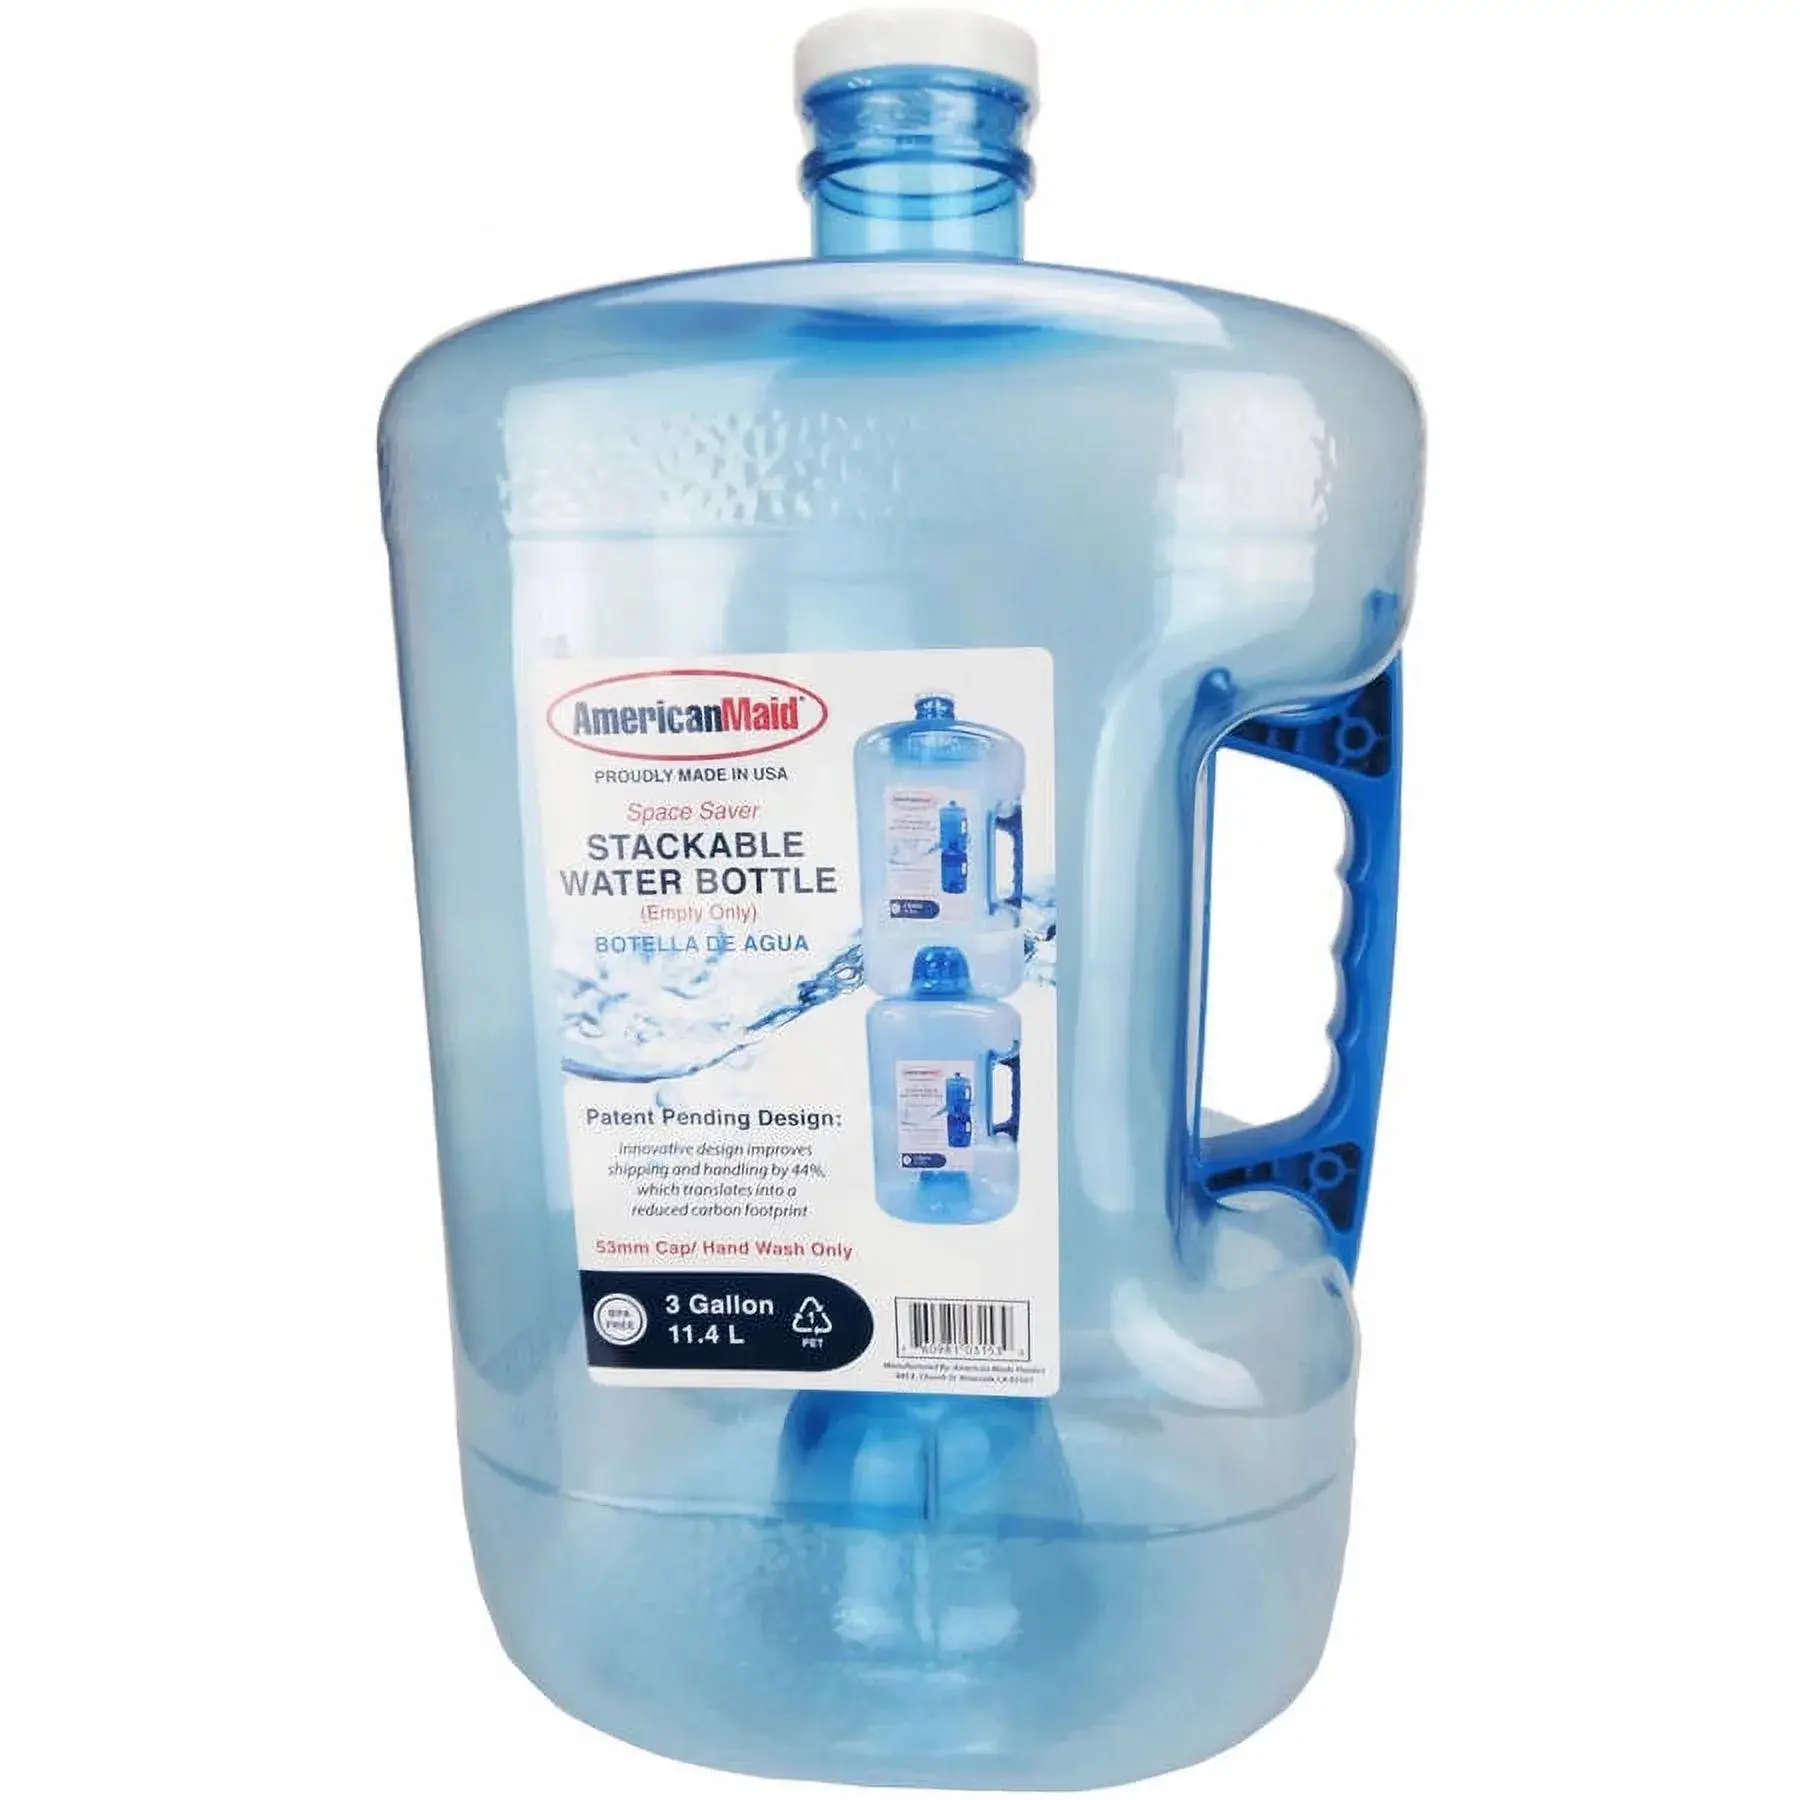 American-Maid-Stackable-Refillable-Water-Gallon-3gal_e78723aa-a2f9-45c5-99bc-7d2e74cf43cf.5cb35119de6faf1460caa7fb823fdcdd